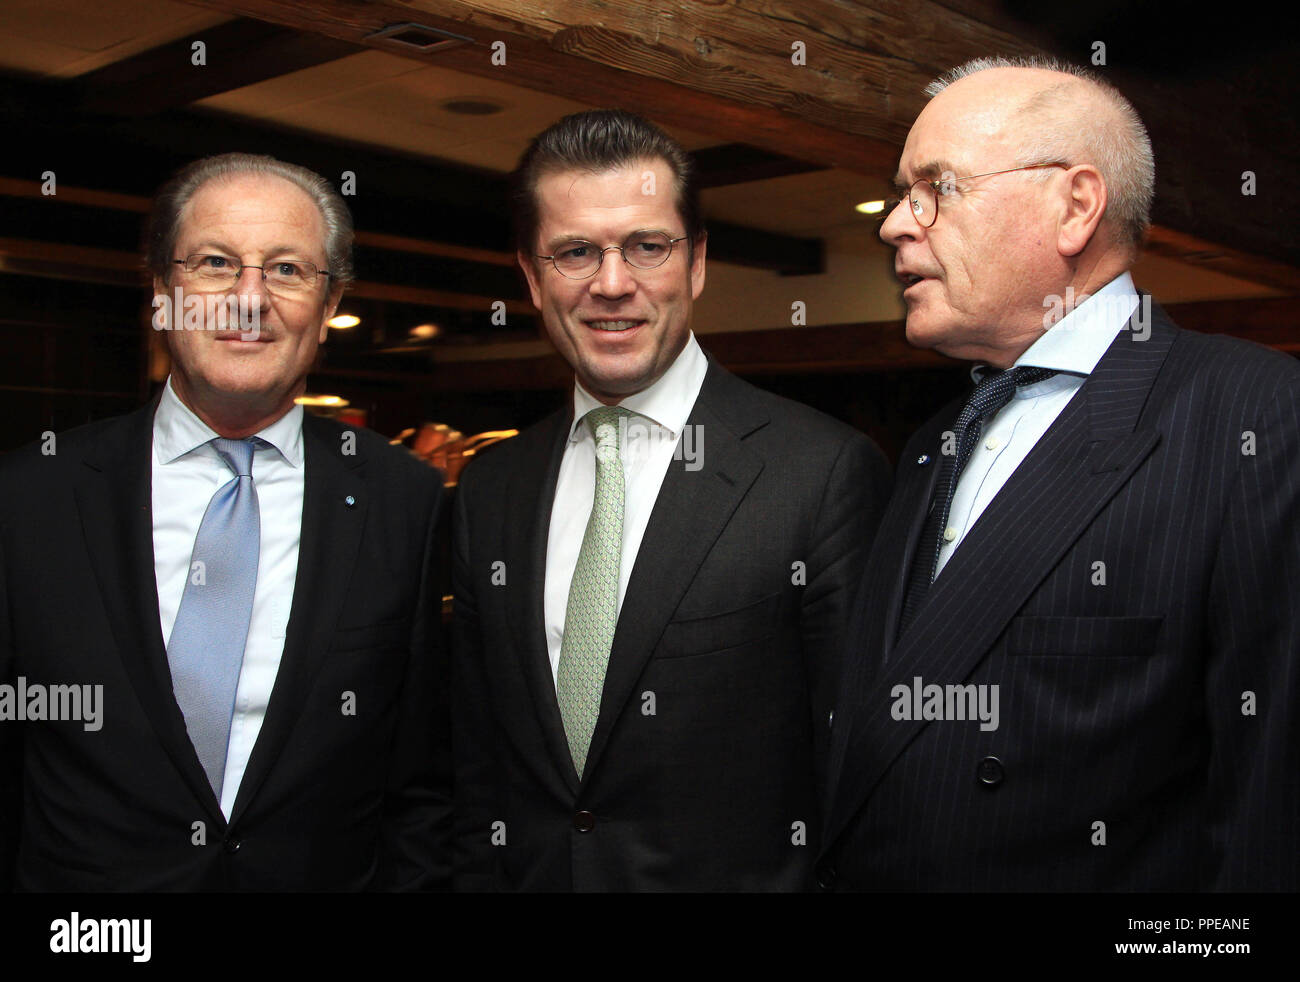 From left to right: Wolfgang Reitzle, CEO of The Linde Group, Defense Minister Karl Theodor zu Guttenberg and host Wolfgang Seybold at the German-American Friendship Dinner in Kaefer Restaurant in Bogenhausen during the Munich Security Conference. Stock Photo